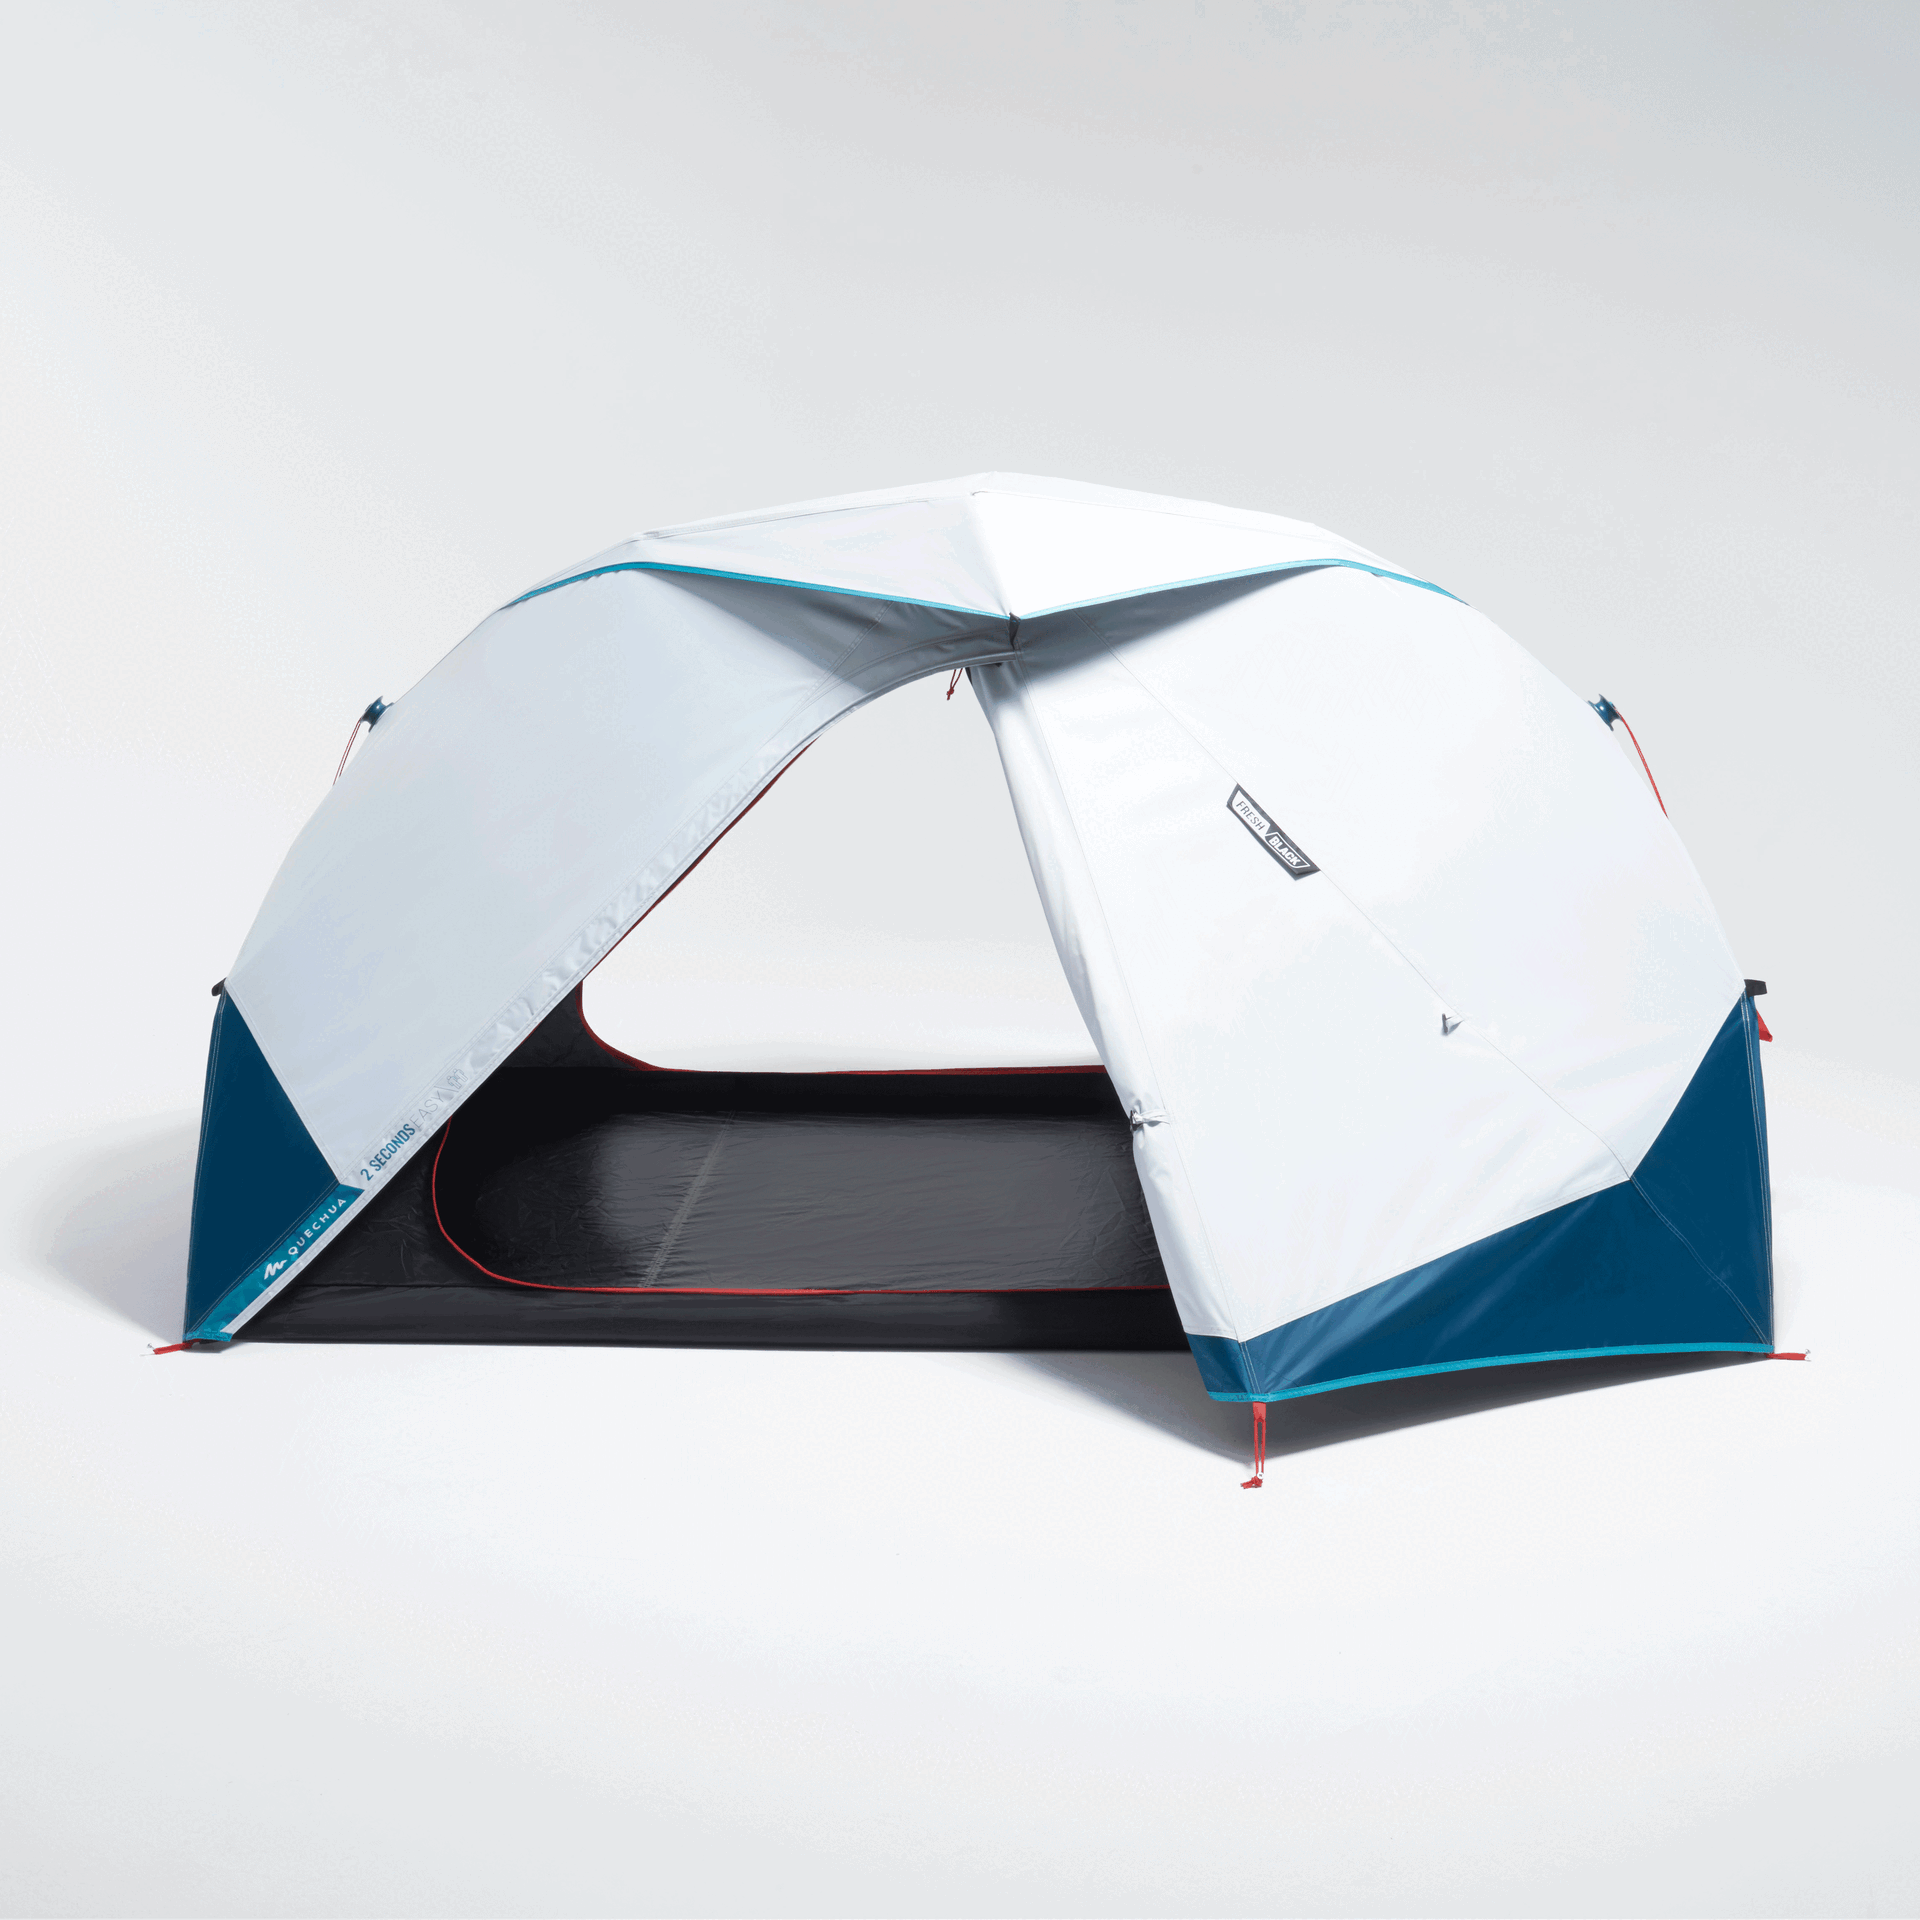 FAMILY POLE TENT - ARPENAZ 6.3 - 6 PERSONS | 2018